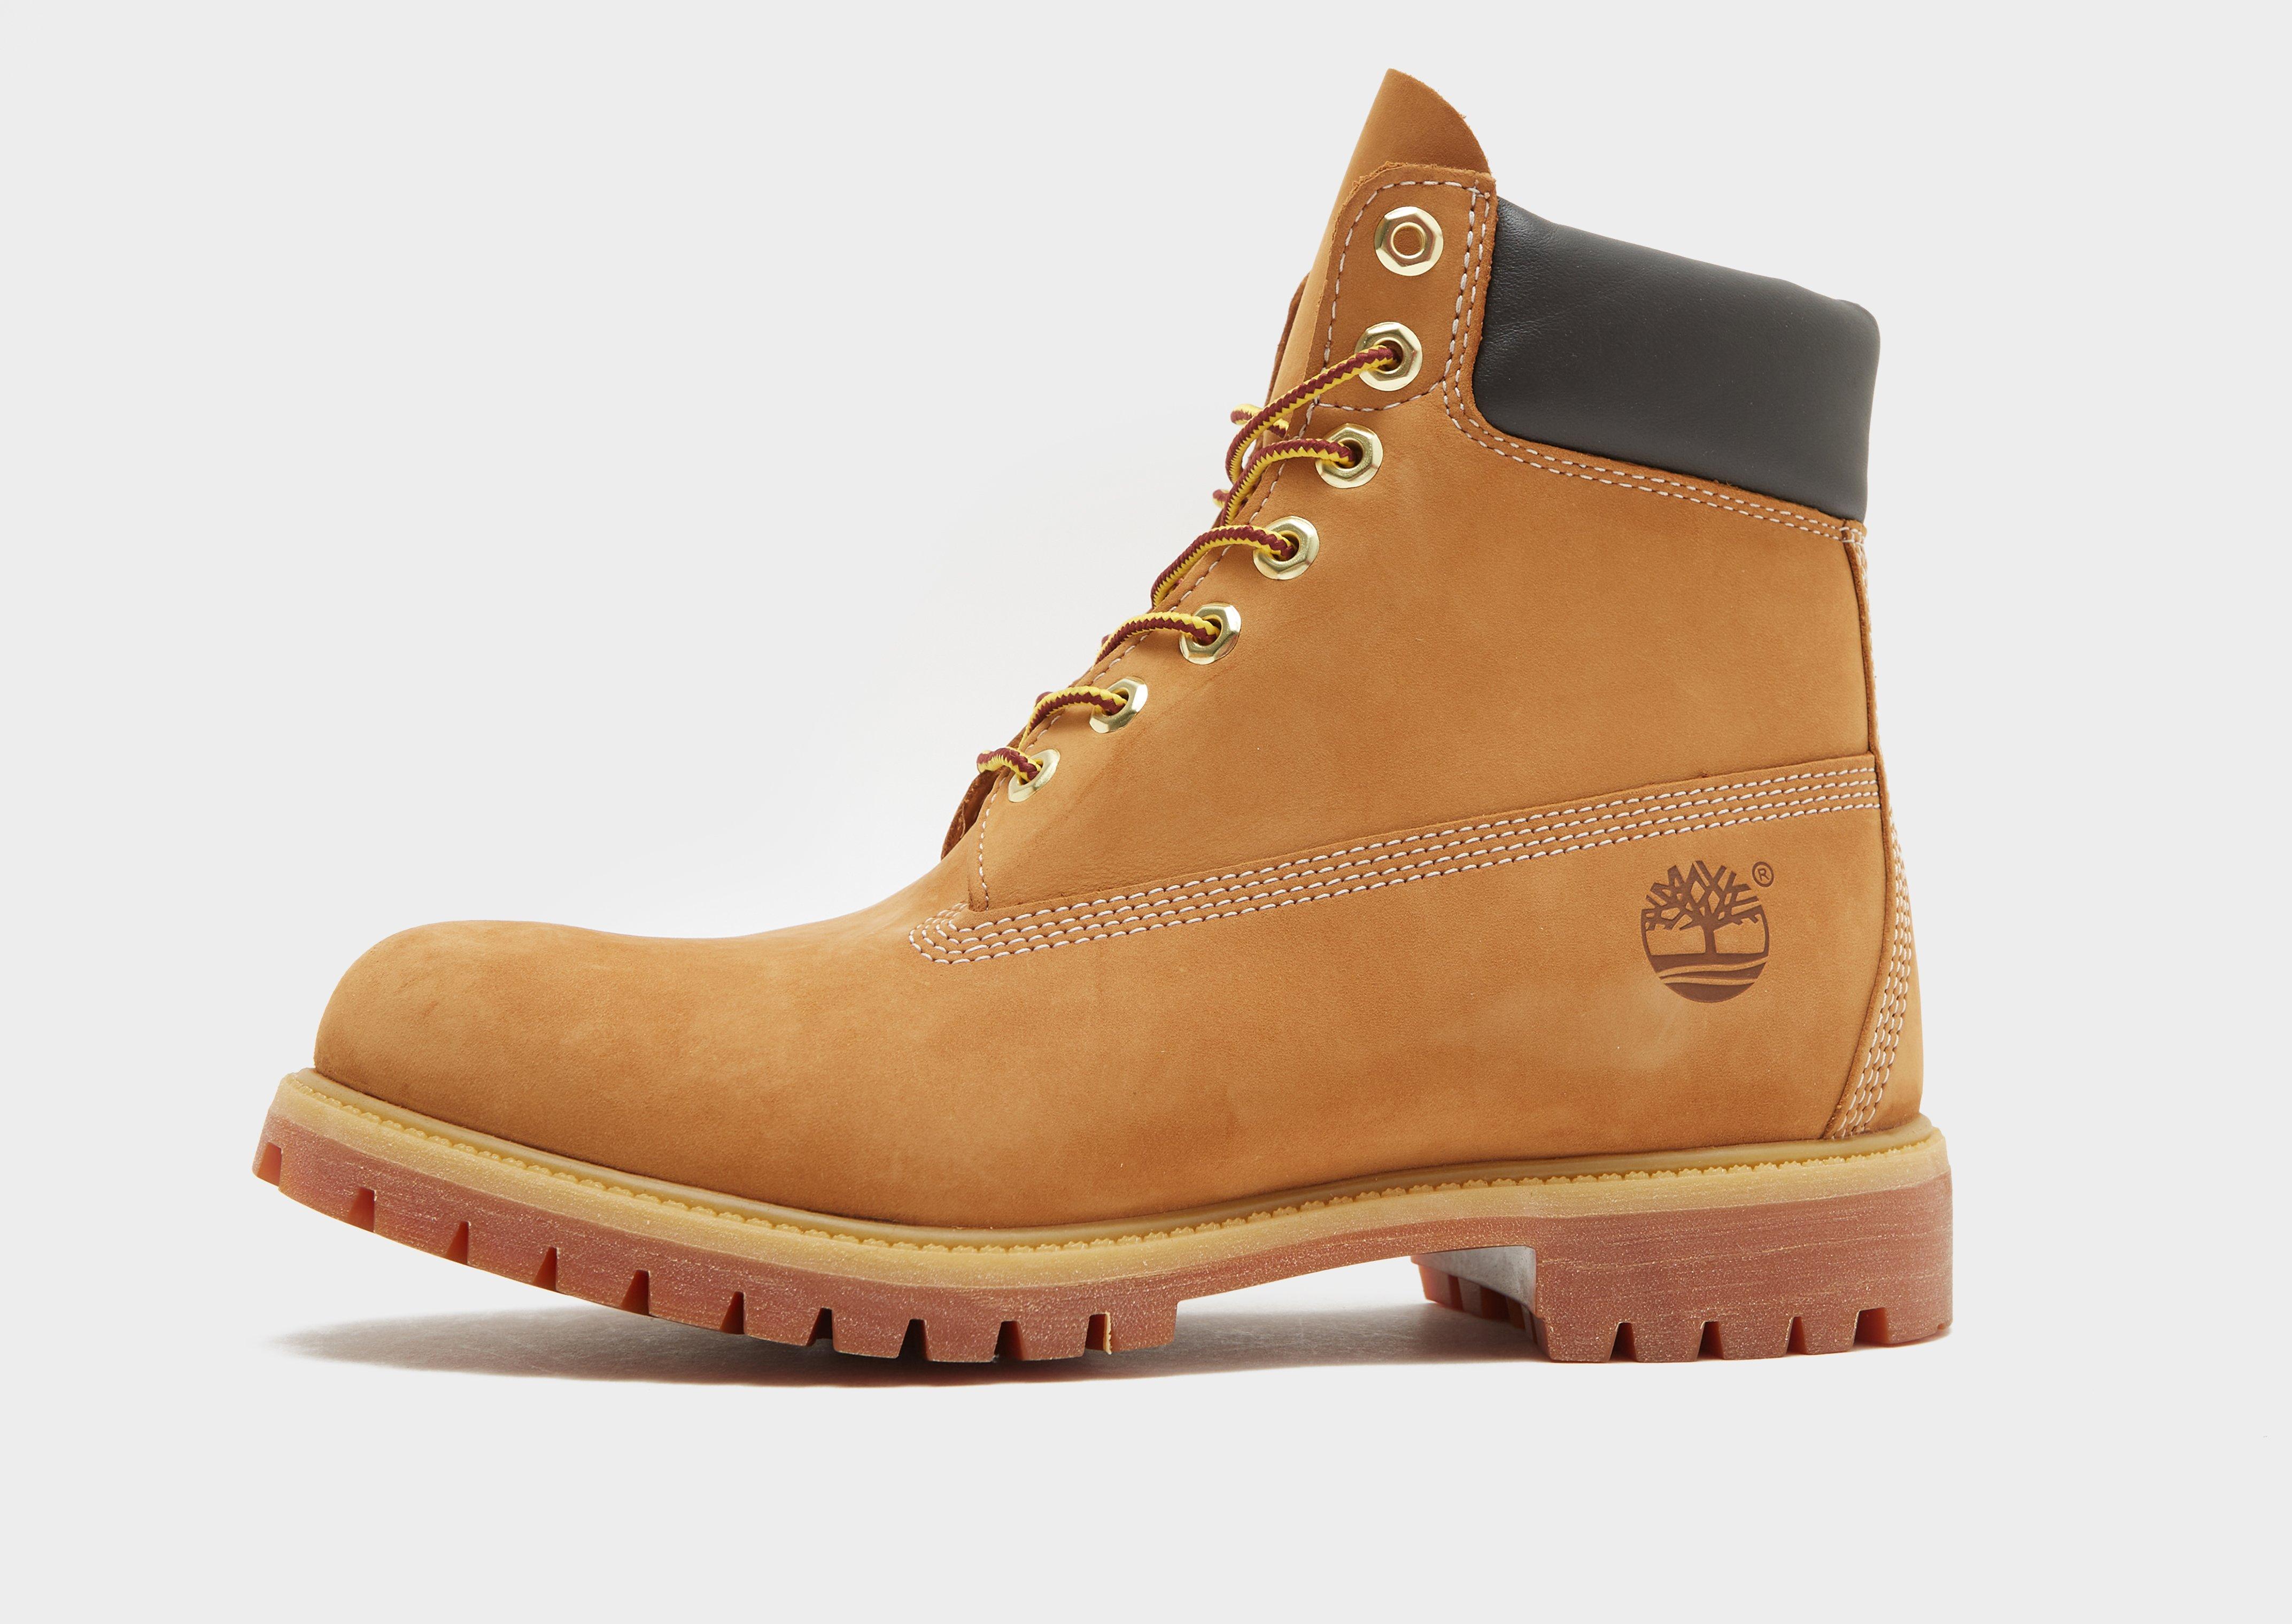 Brown Timberland 6" Boot JD Sports Global